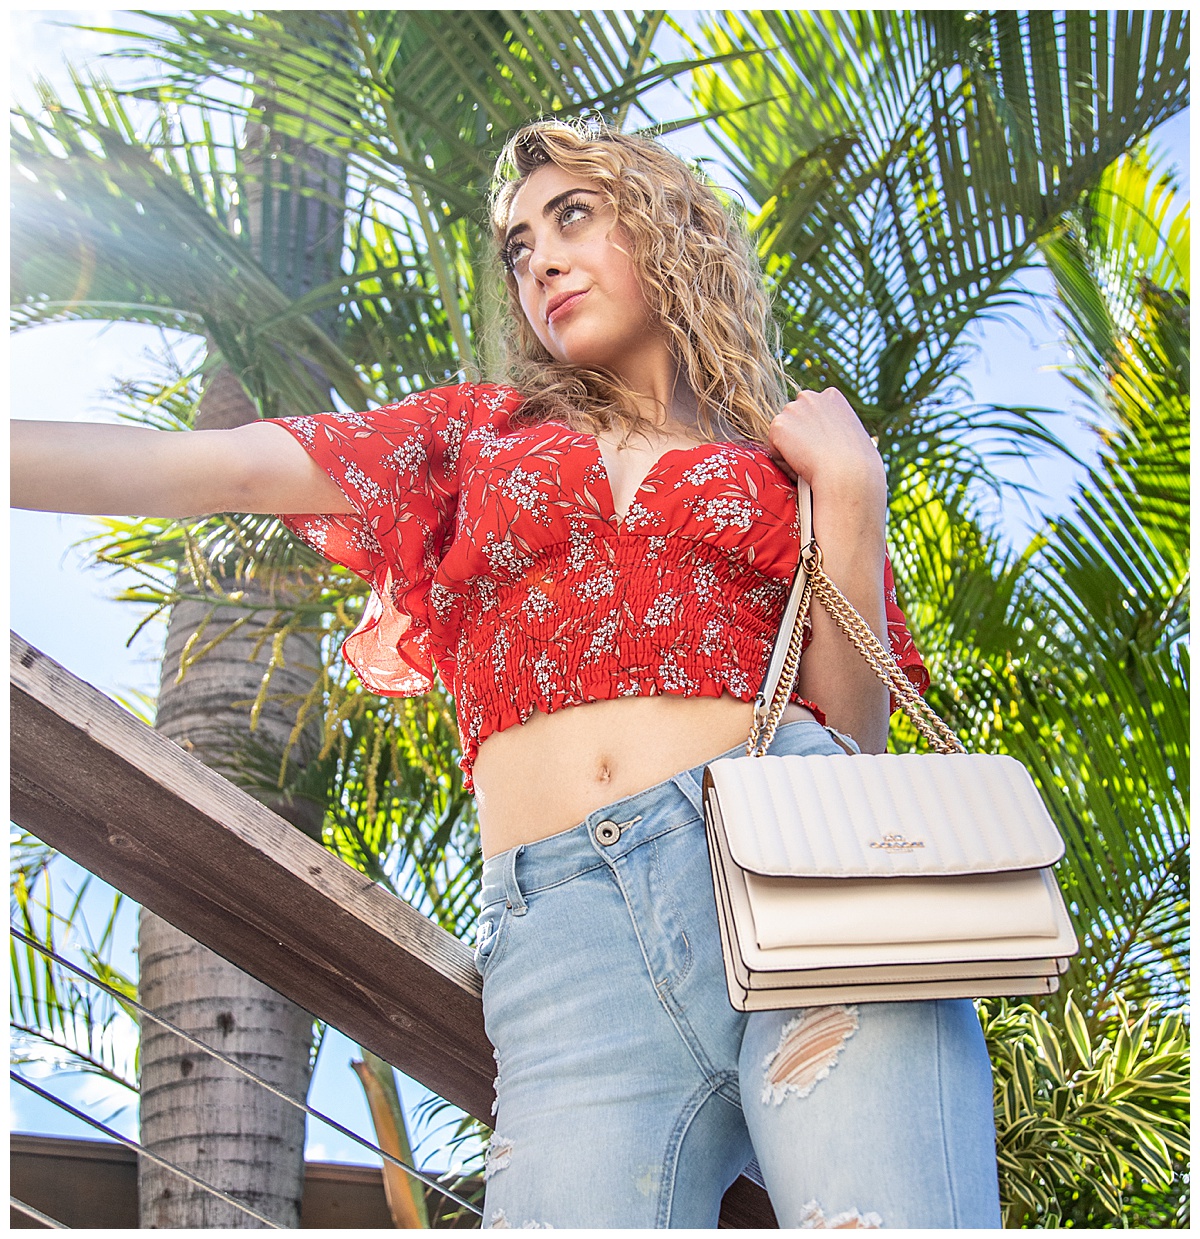 Woman with curly blonde hair wearing a red shirt holding a white Coach purse posing in a fashion photoshoot.